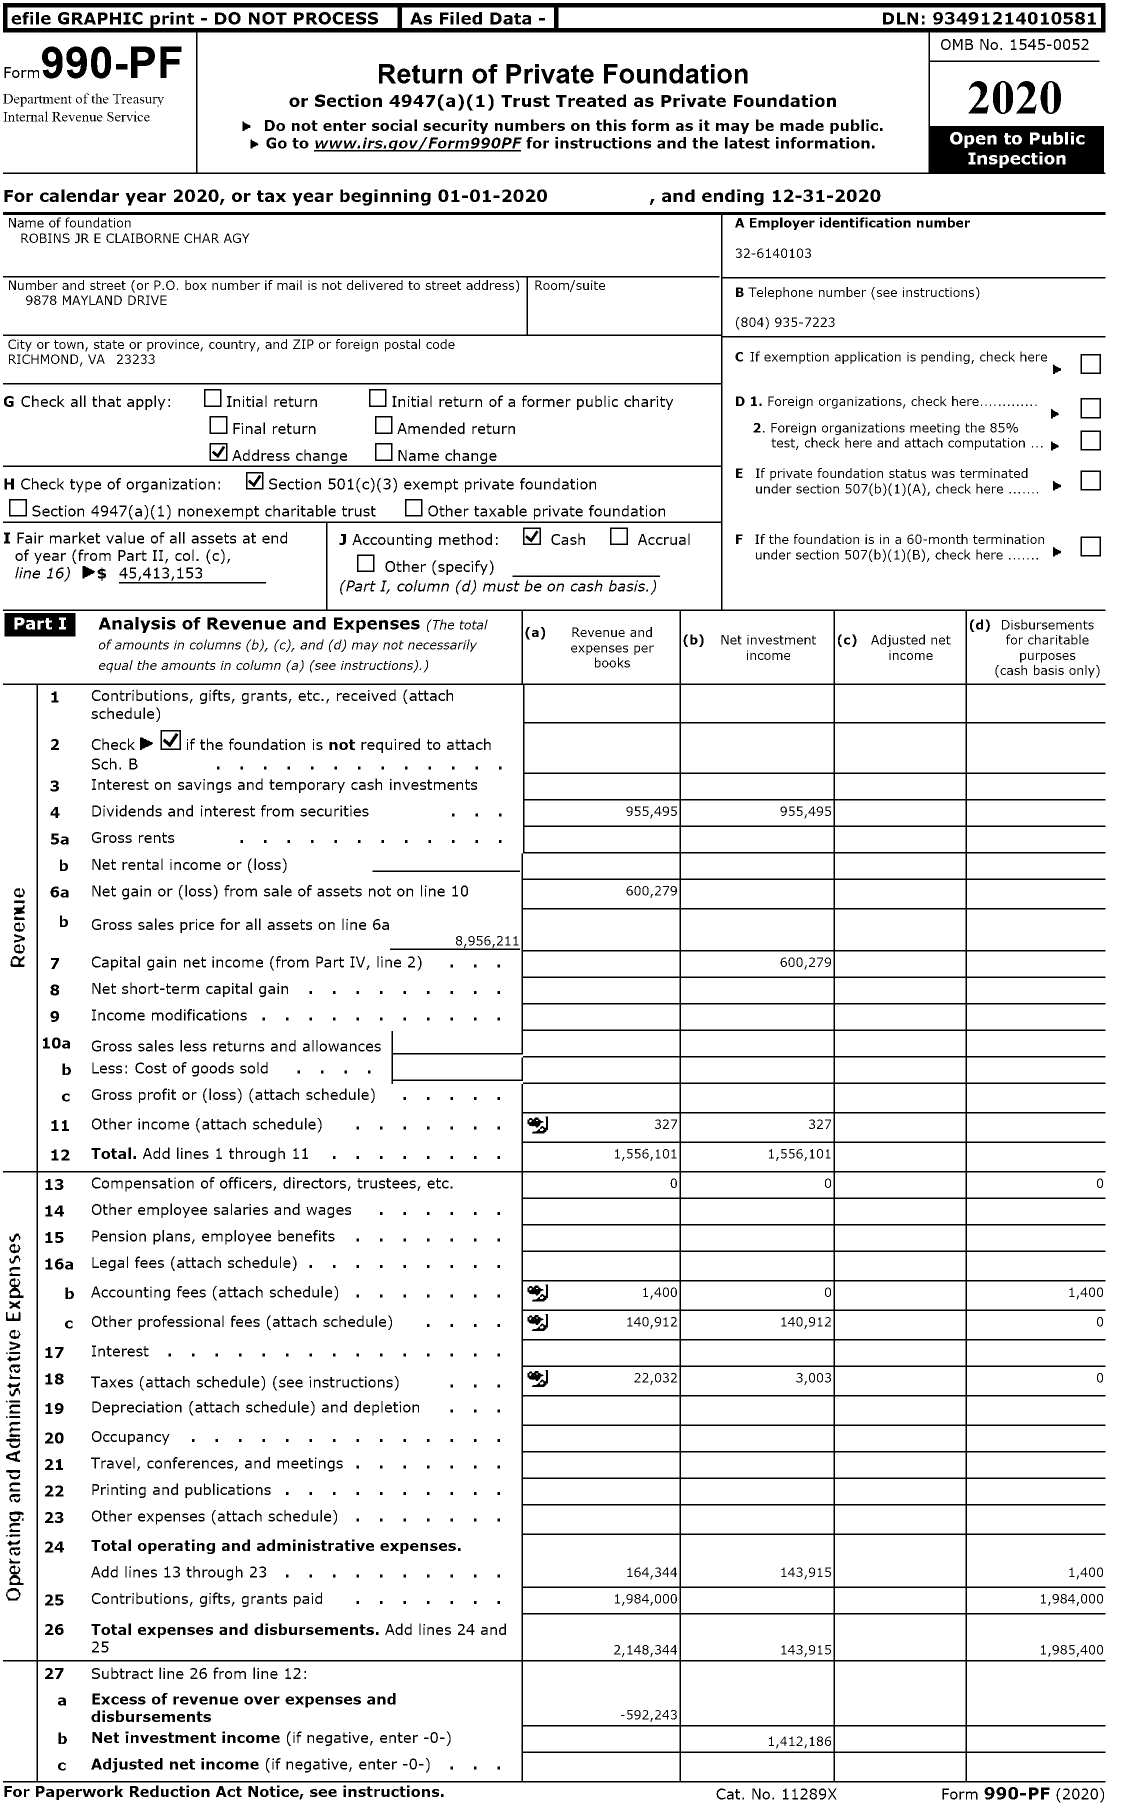 Image of first page of 2020 Form 990PF for E Claiborne Robins JR Charitable Trust